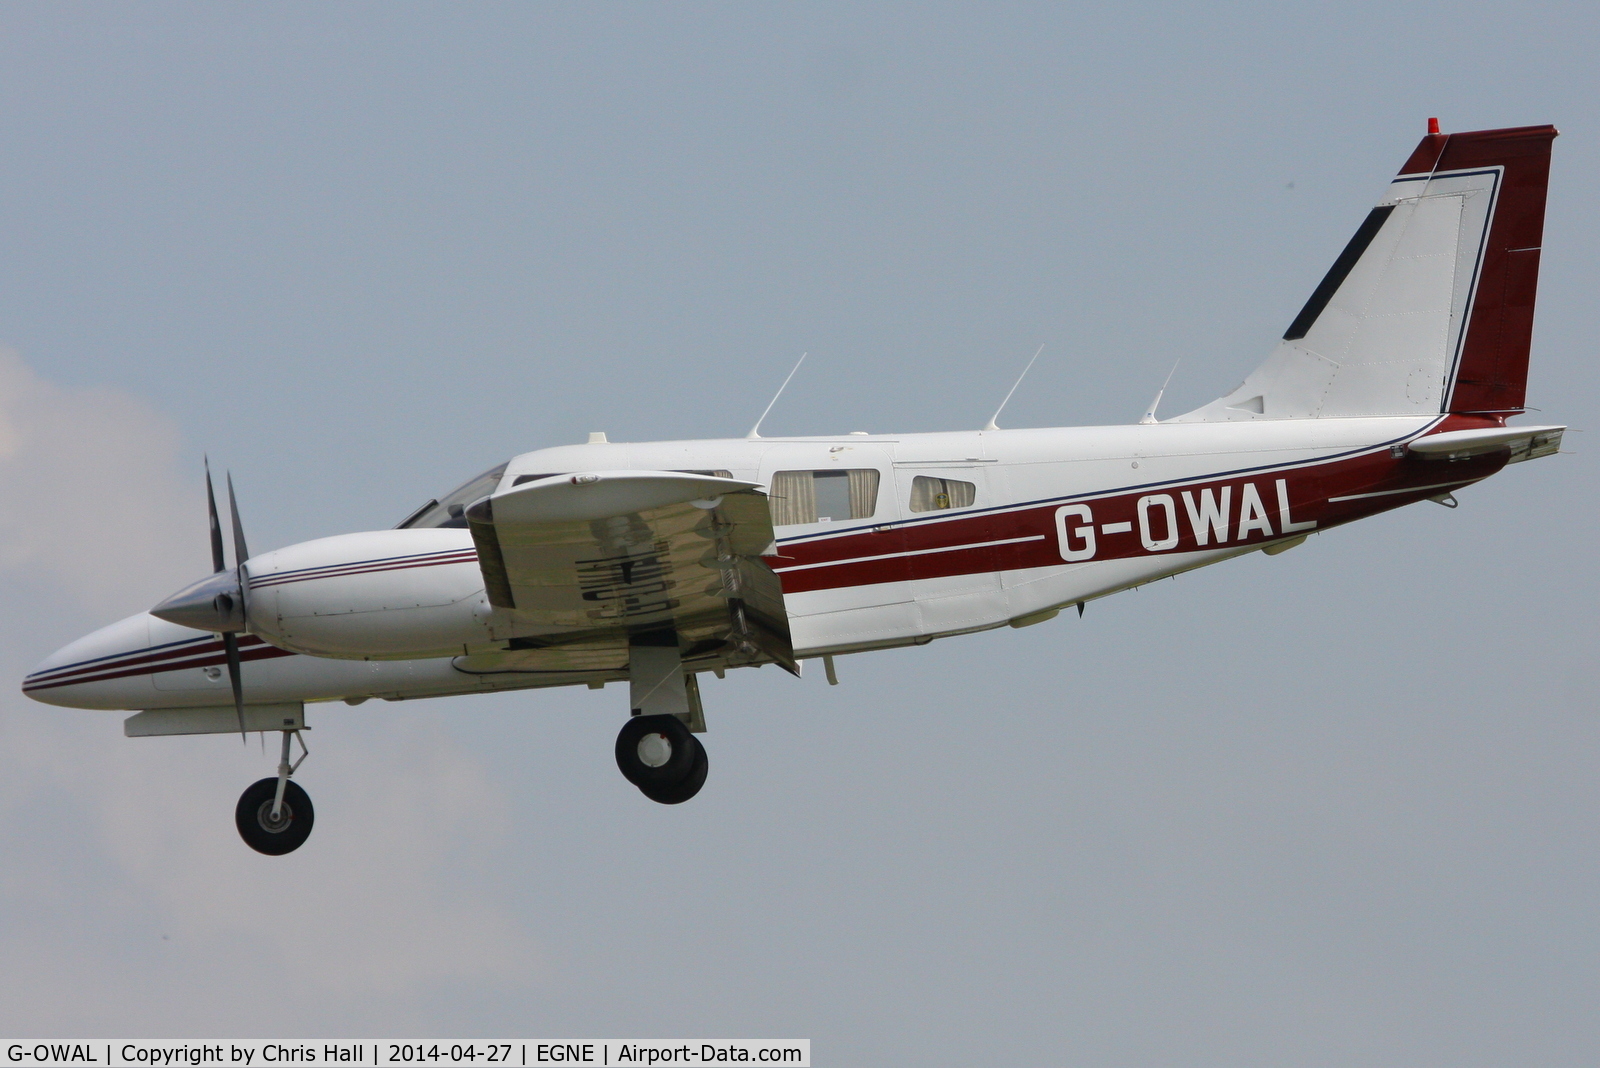 G-OWAL, 1993 Piper PA-34-220T Seneca III C/N 34-48030, Privately owned